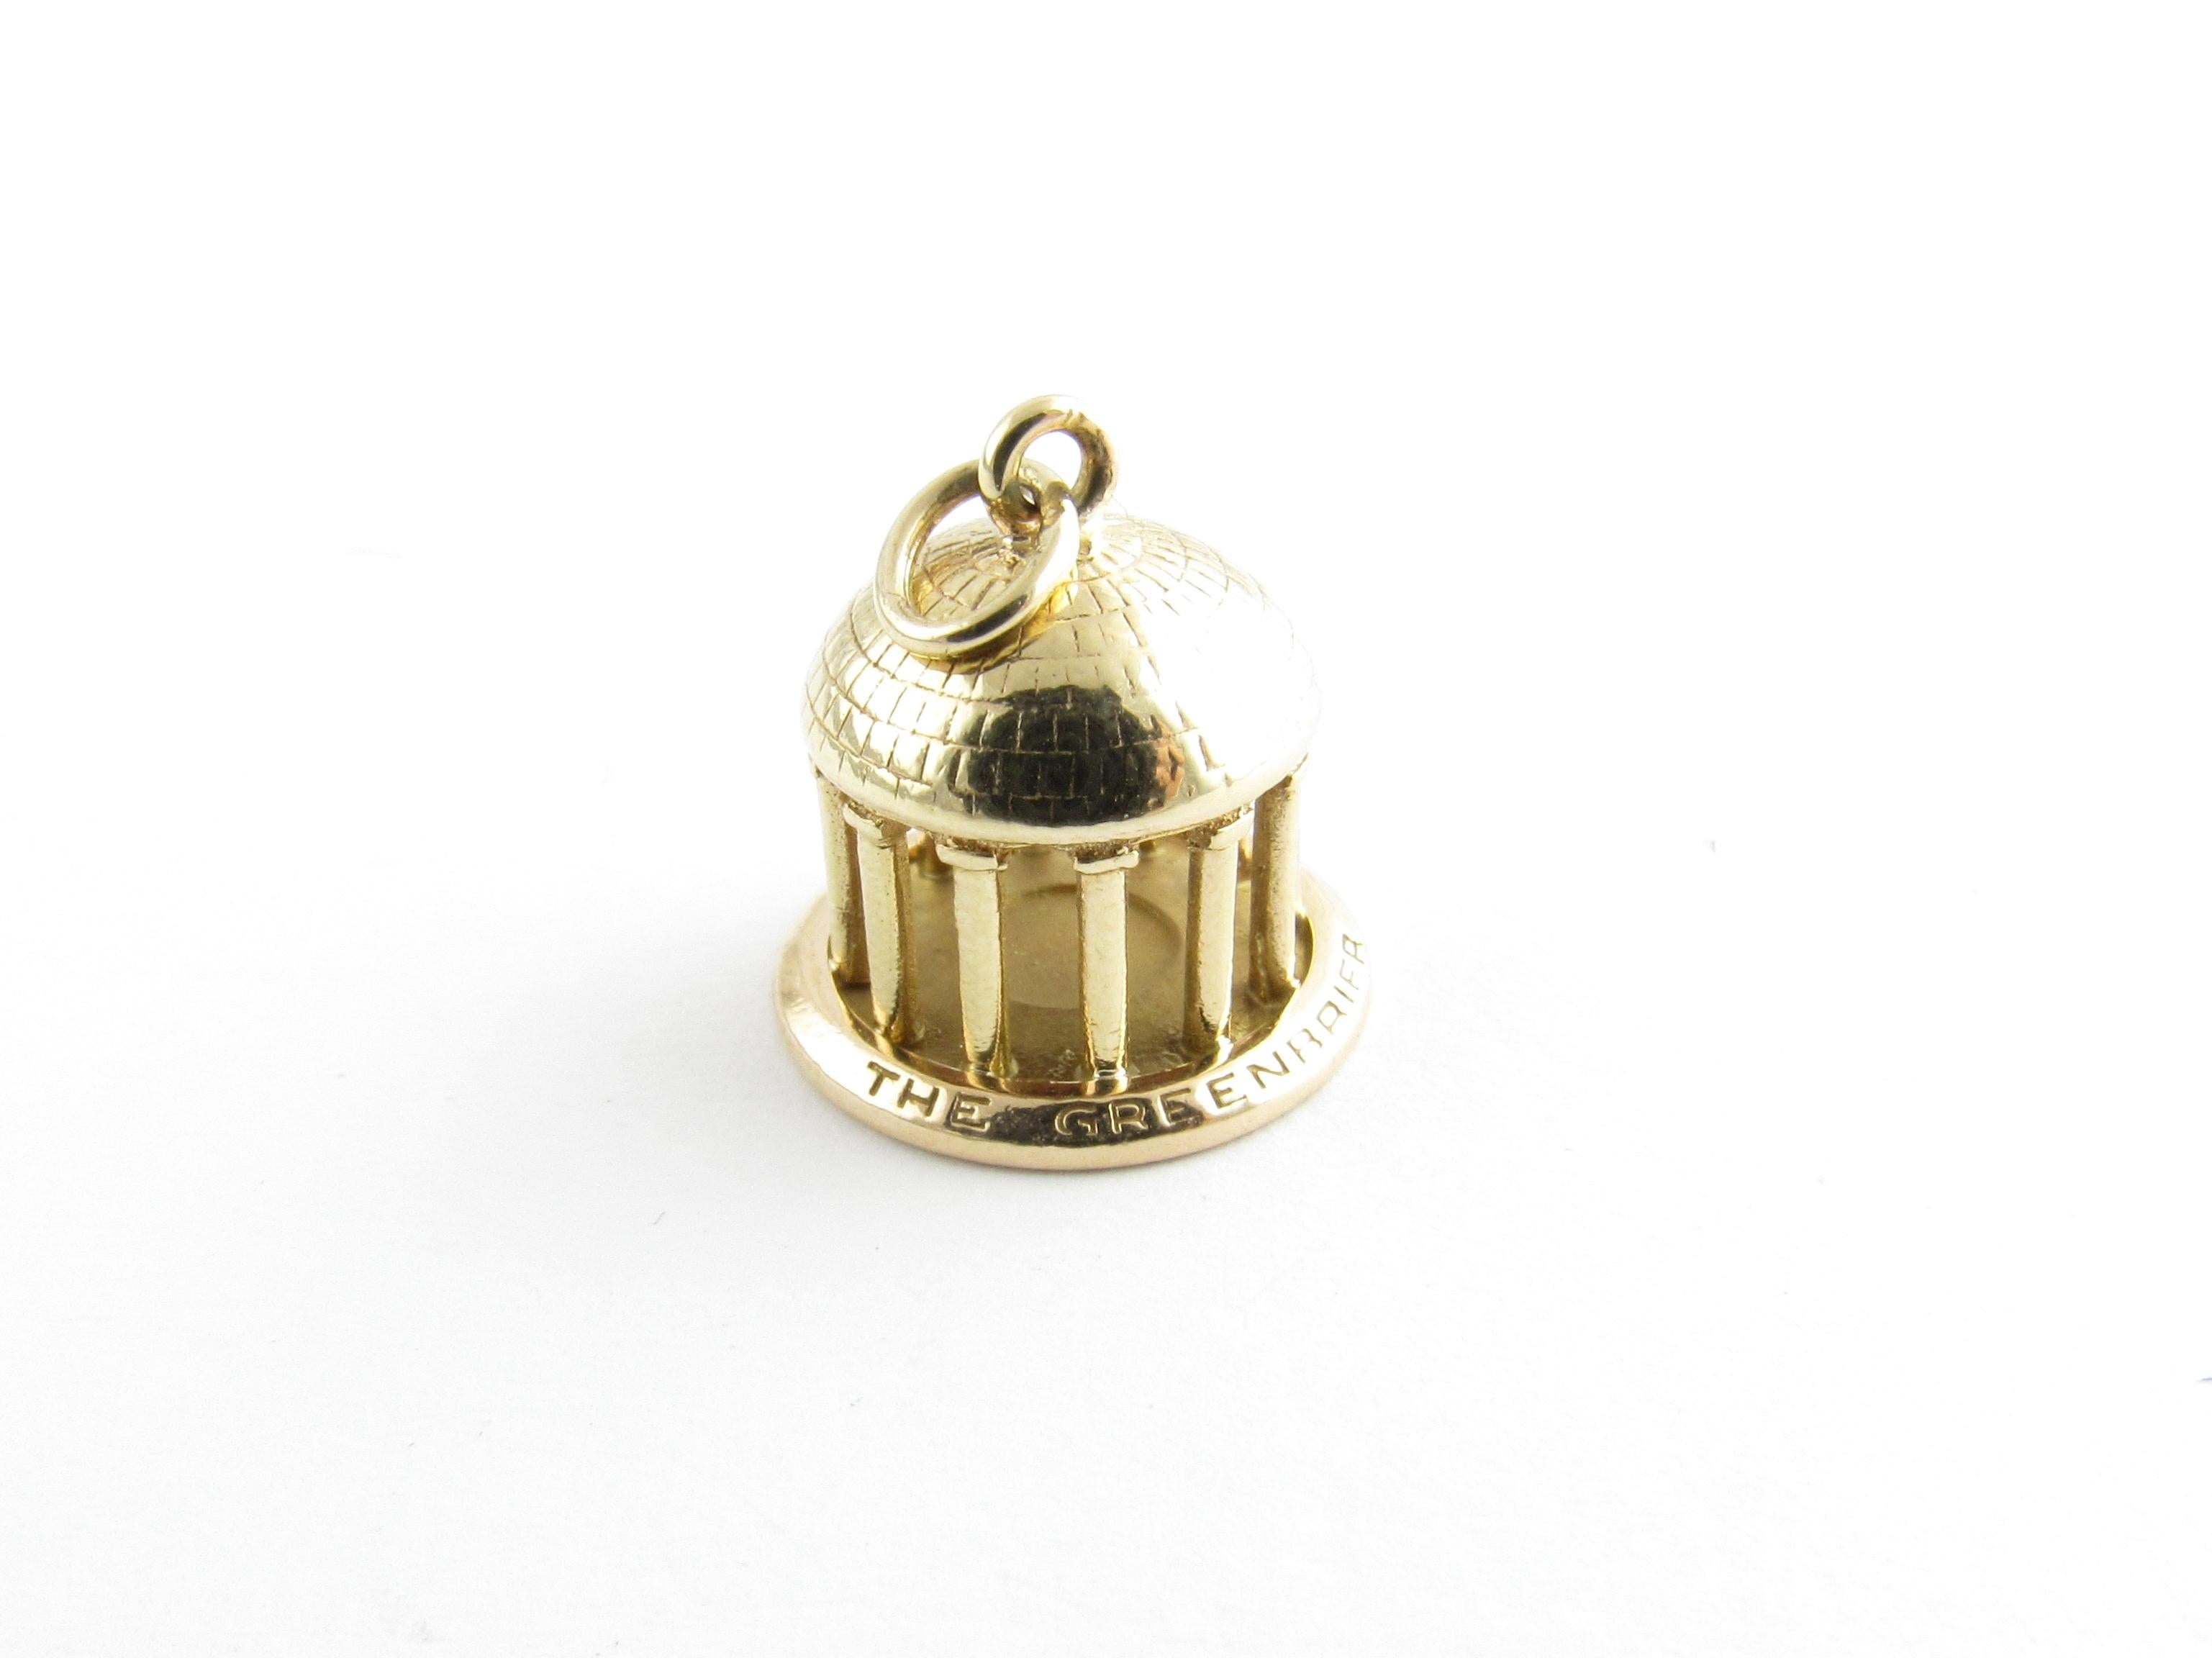 Vintage 14 Karat Yellow Gold Greenbrier Dome Charm

Located in the Allegheny mountains of West Virginia, the Greenbrier Resort is a national historical landmark.

This lovely 3D charm features the historical dome meticulously detailed in 14K yellow